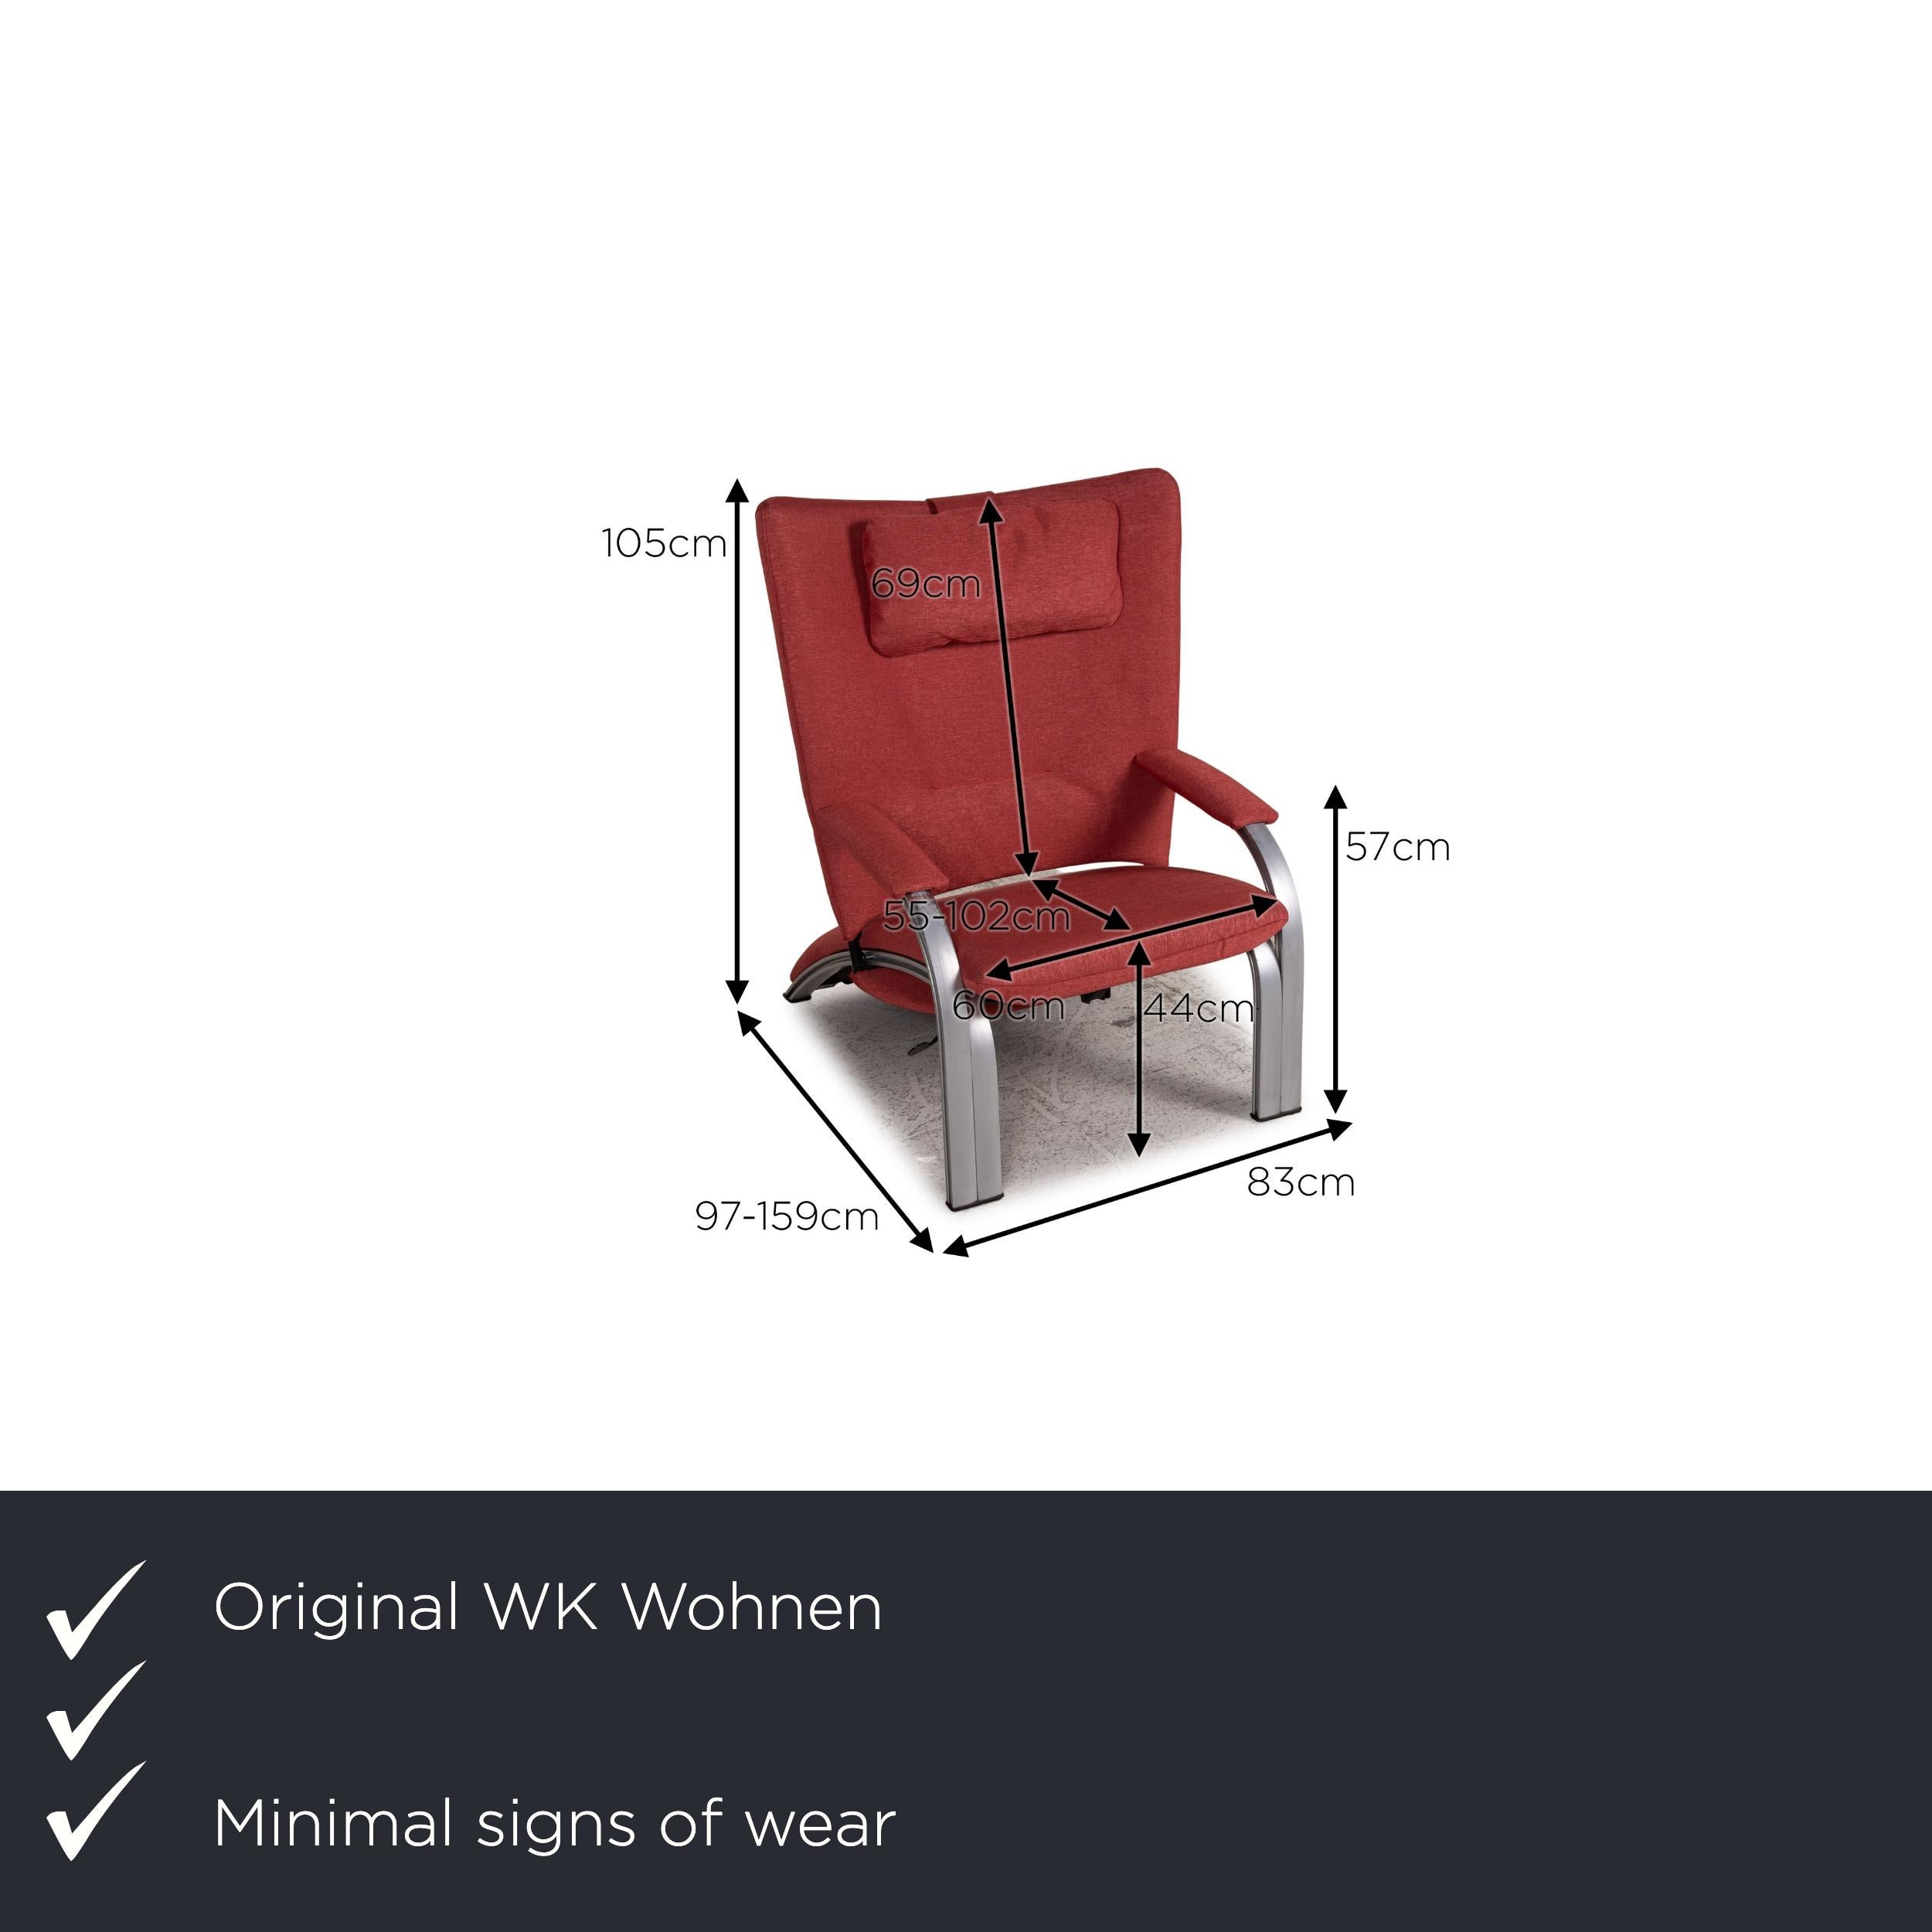 We present to you a WK Wohnen Spot 698 armchair fabric red function relaxation function.

Product measurements in centimeters:

depth: 97
width: 83
height: 105
seat height: 44
rest height: 57
seat depth: 55
seat width: 60
back height: